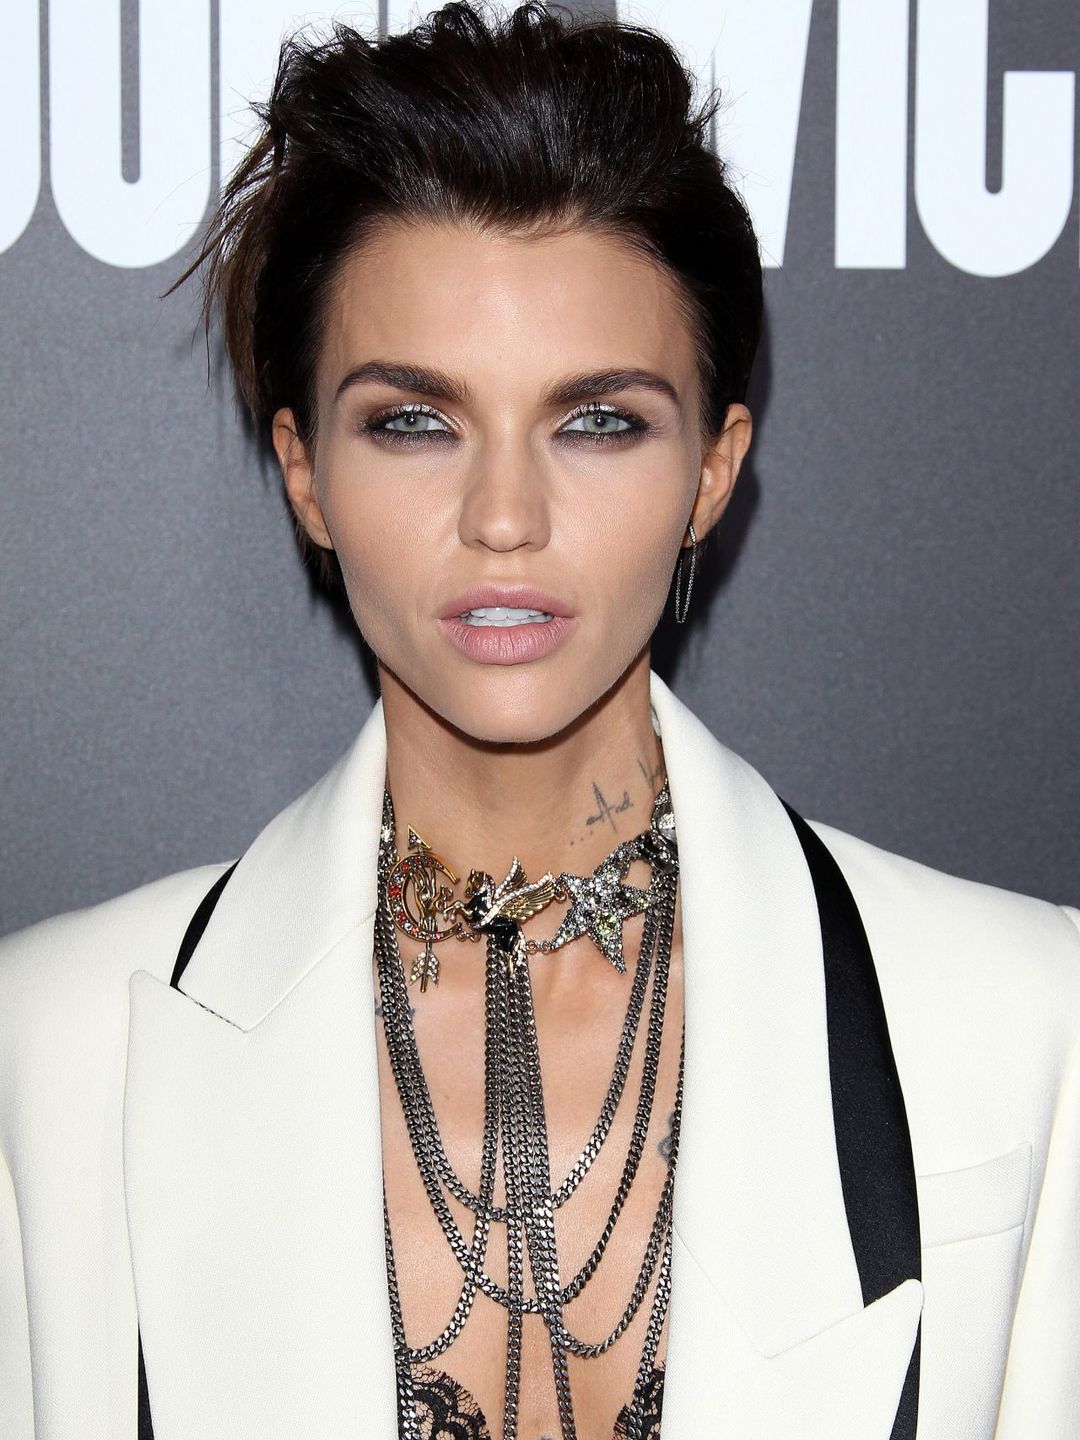 Ruby Rose in her youth